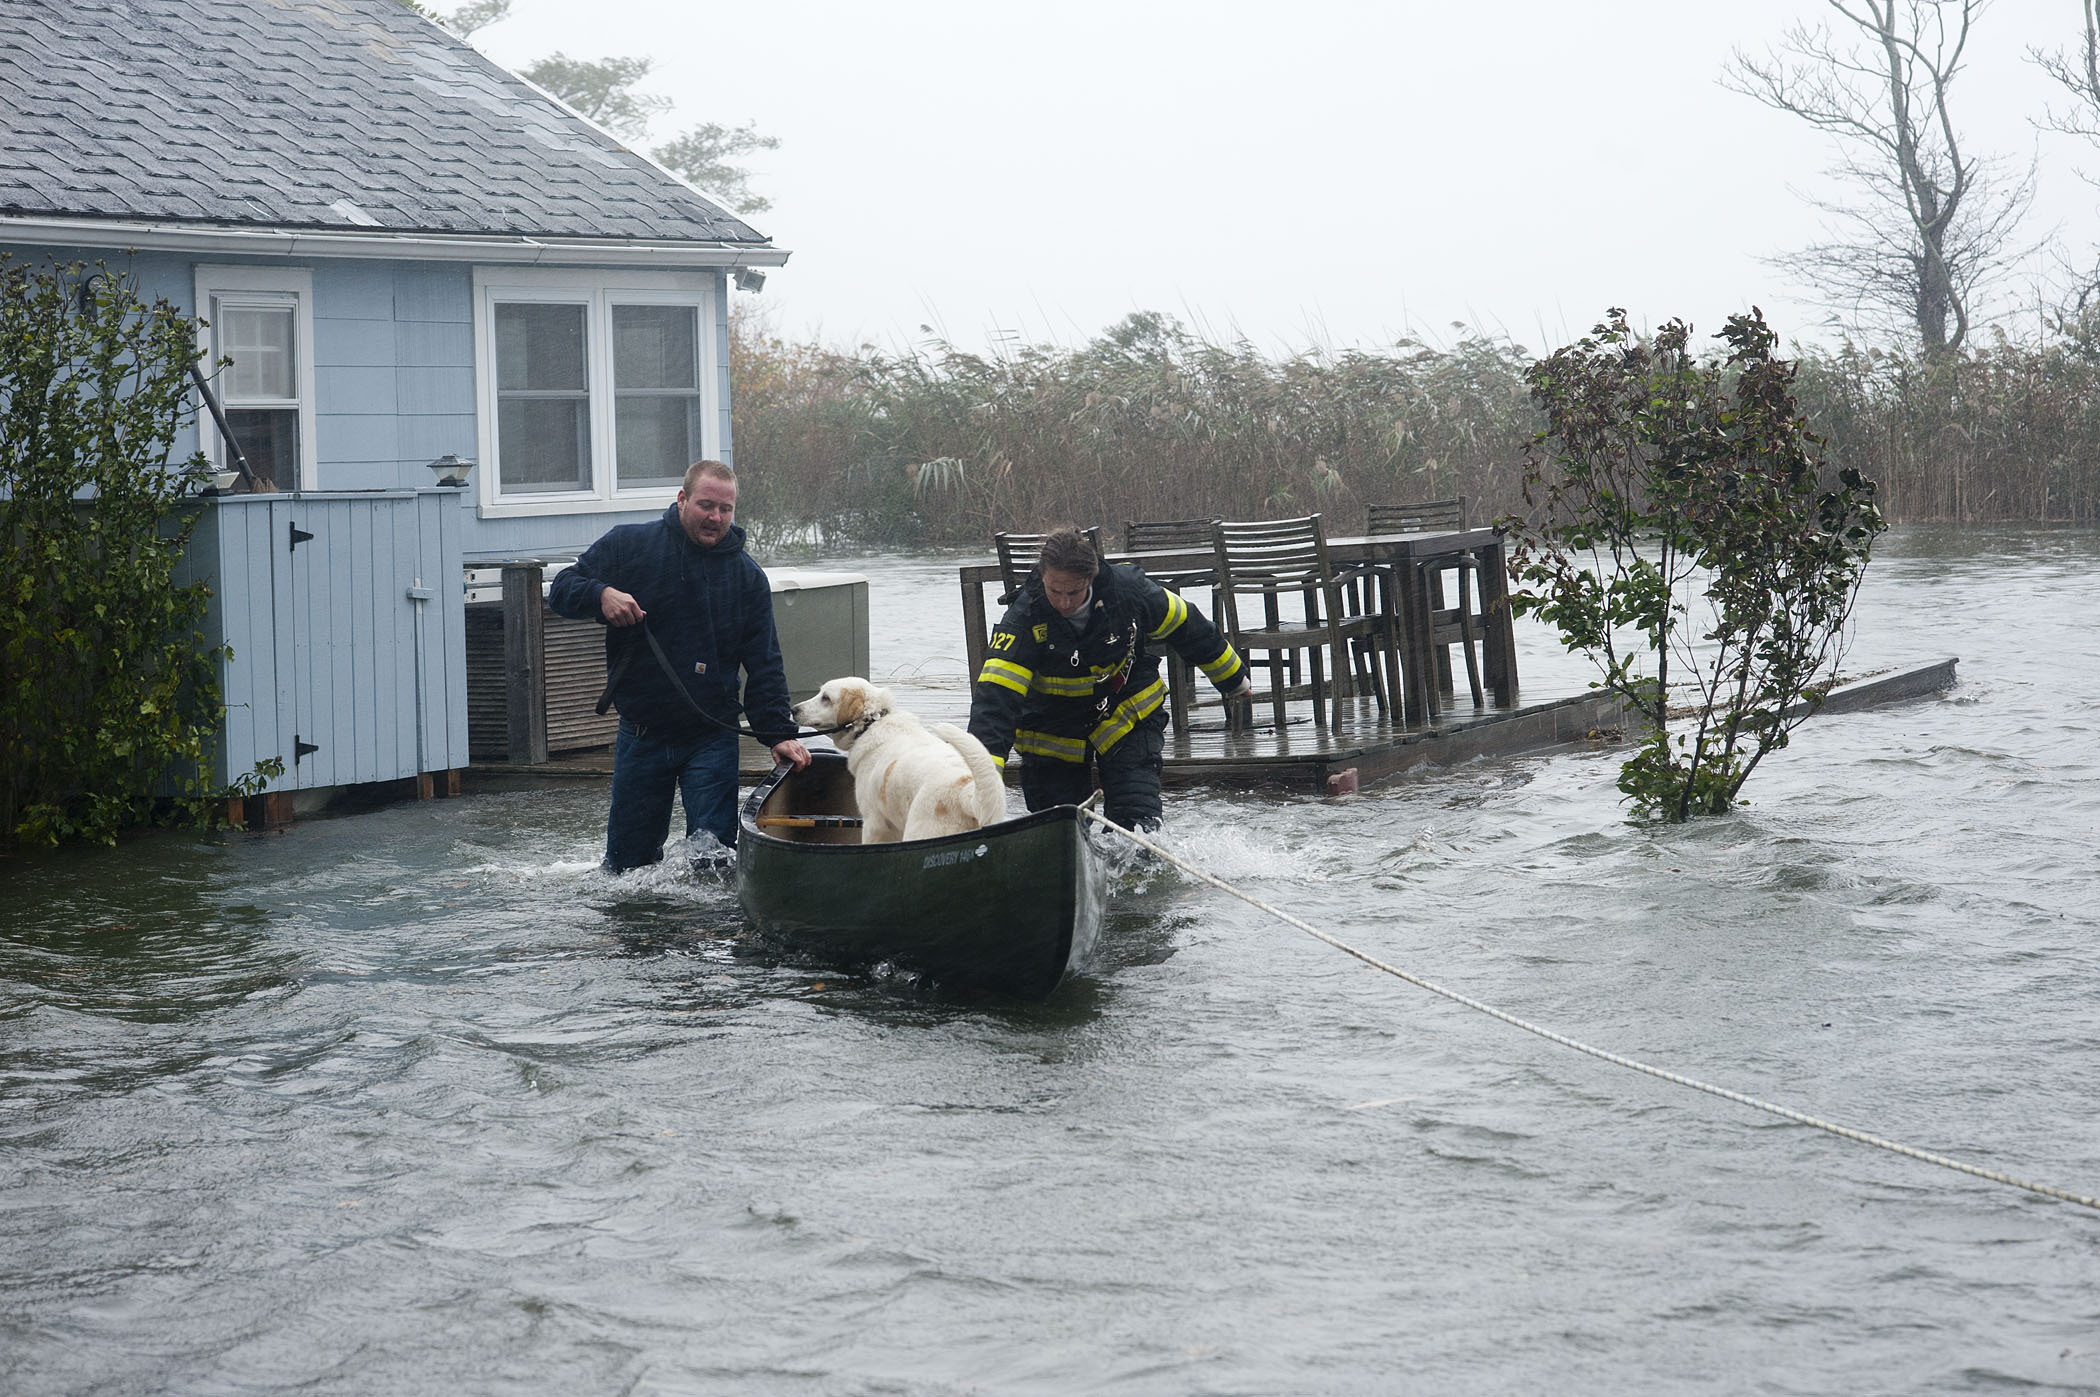 At roughly 11:00 a.m., Sag Harbor Firefighters Mike Labrozzi and Kelly Bailey use a canoe to transport a pet dog as they help rescue a Bay Avenue, Pine Neck resident and his pets who had become stranded due to rising water during hurricane Sandy on Monday, October 29, 2012.   MICHAEL HELLER